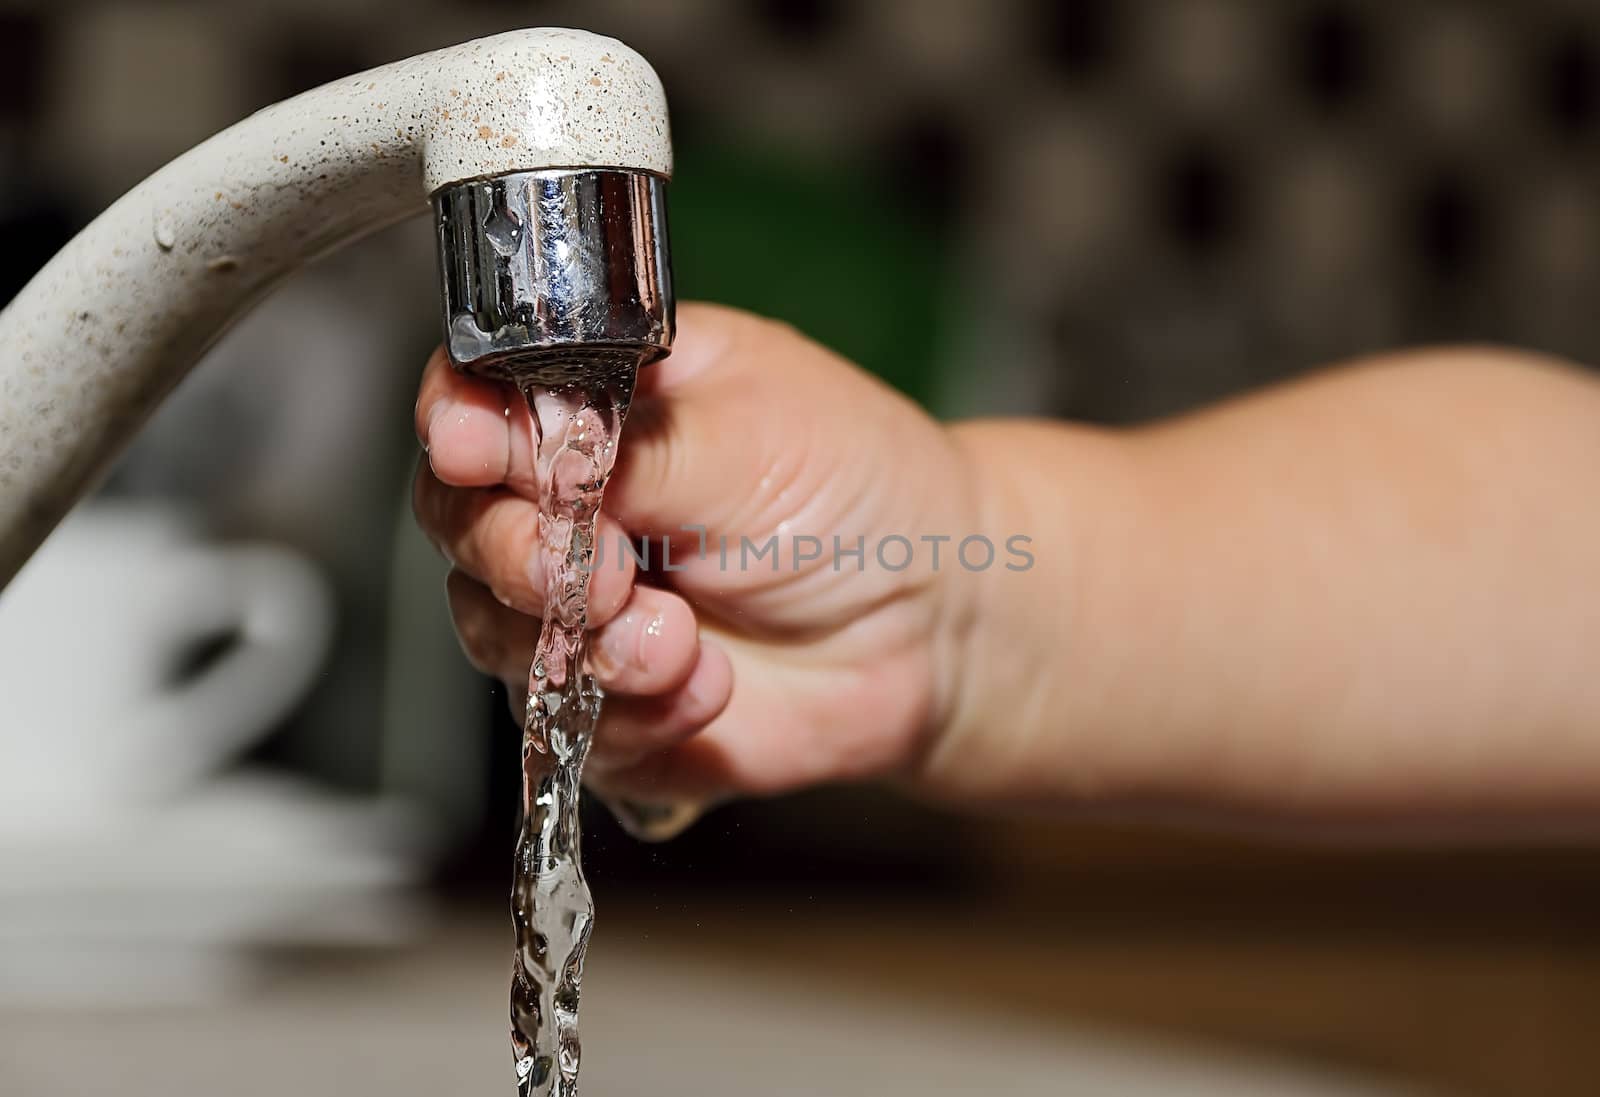 a child's hand is cooled down in the water from a tap